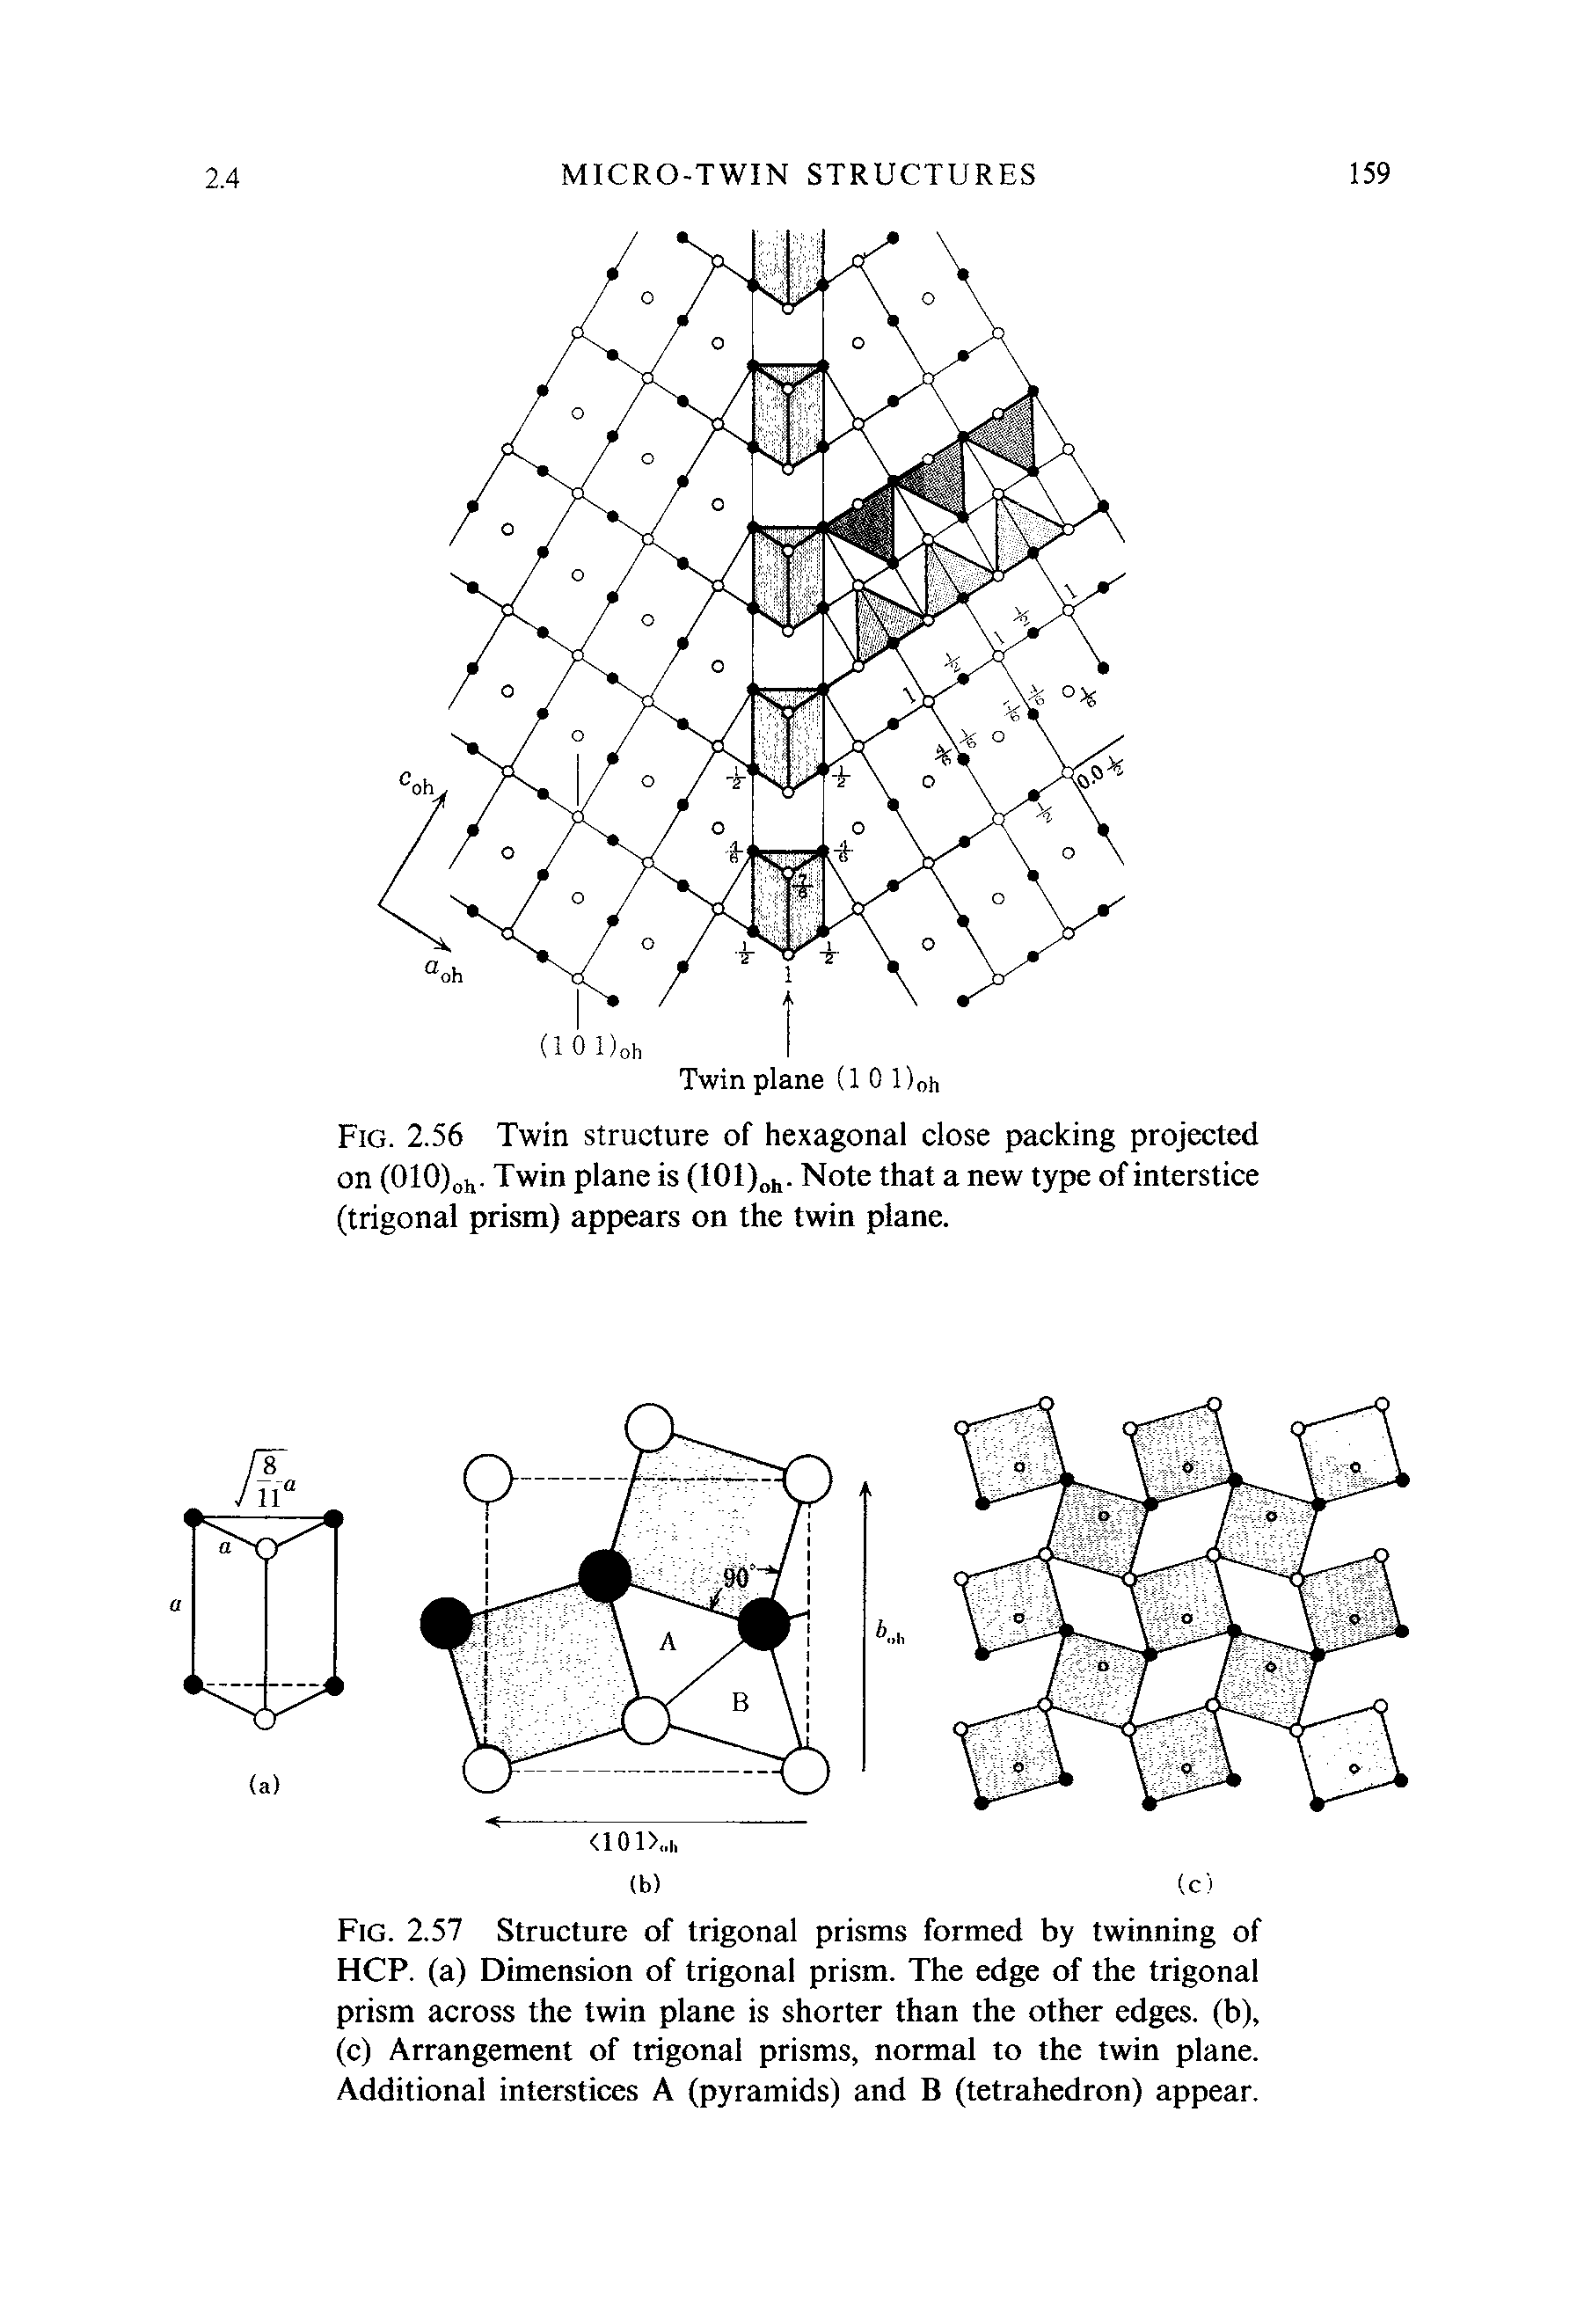 Fig. 2.56 Twin structure of hexagonal close packing projected on (OlO)oh - Twin plane is (101),. Note that a new type of interstice (trigonal prism) appears on the twin plane.